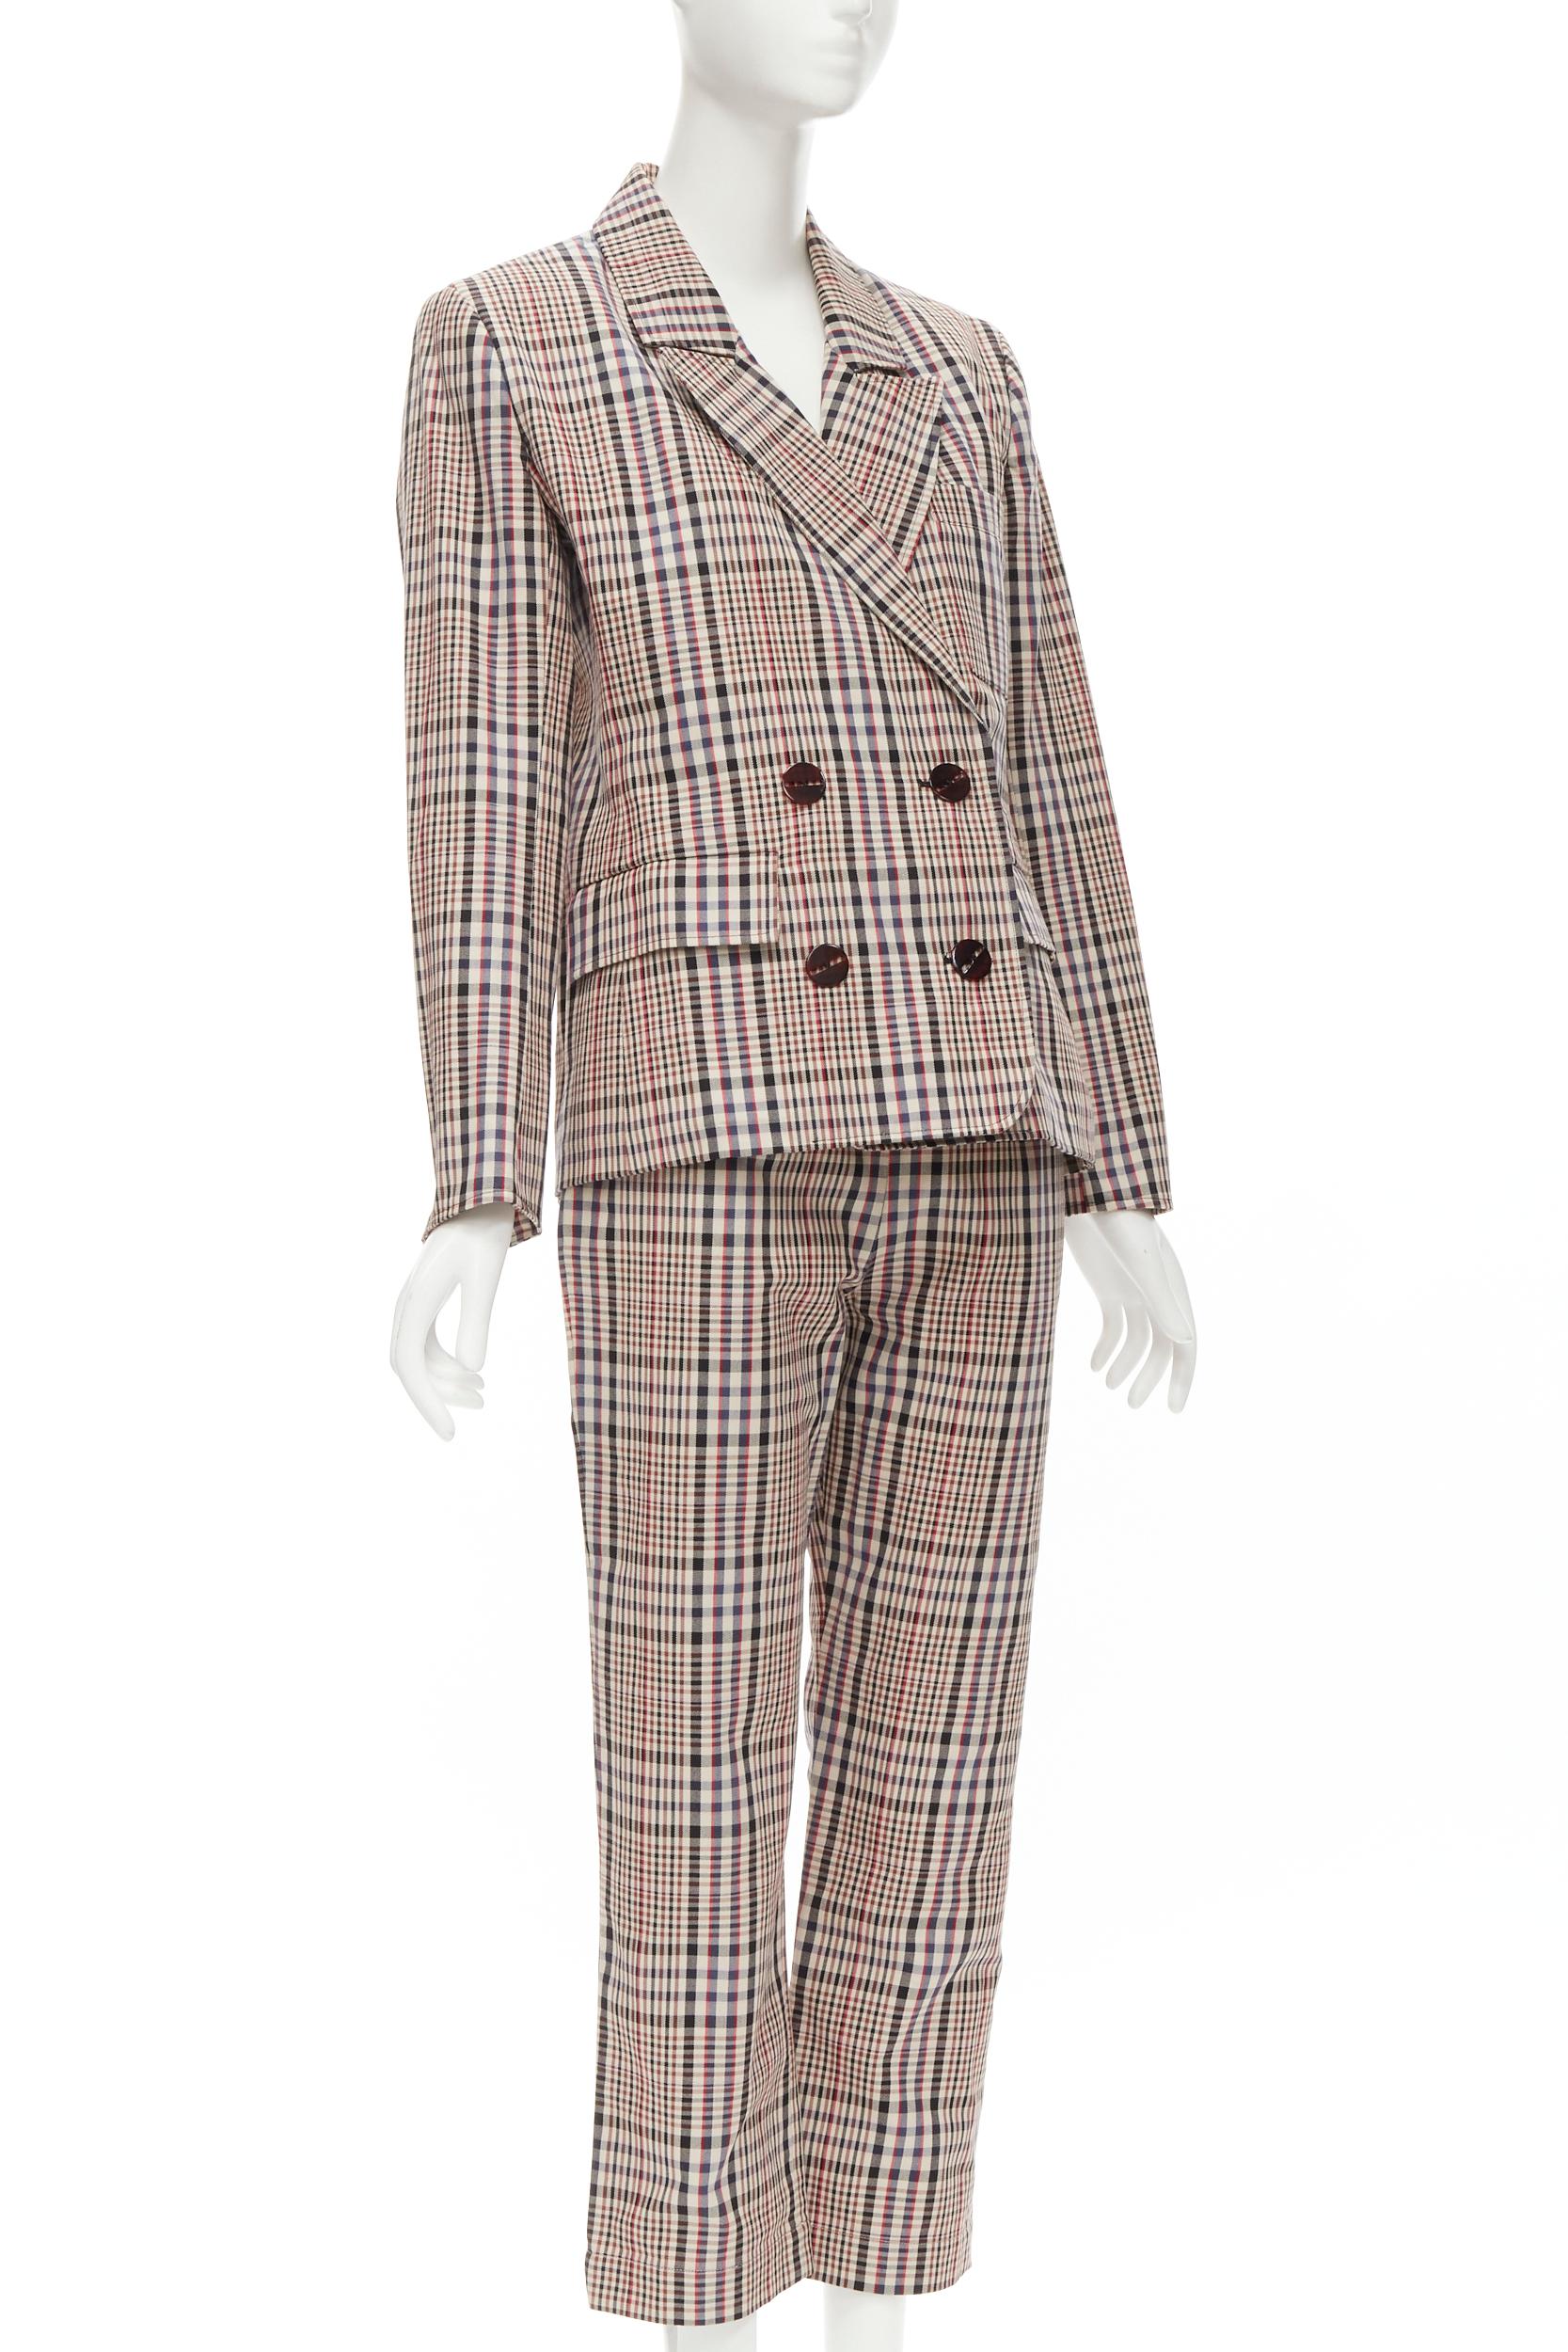 ISA ARFEN beige black red checkered double breasted blazer pants set 8 IT40 In New Condition For Sale In Hong Kong, NT